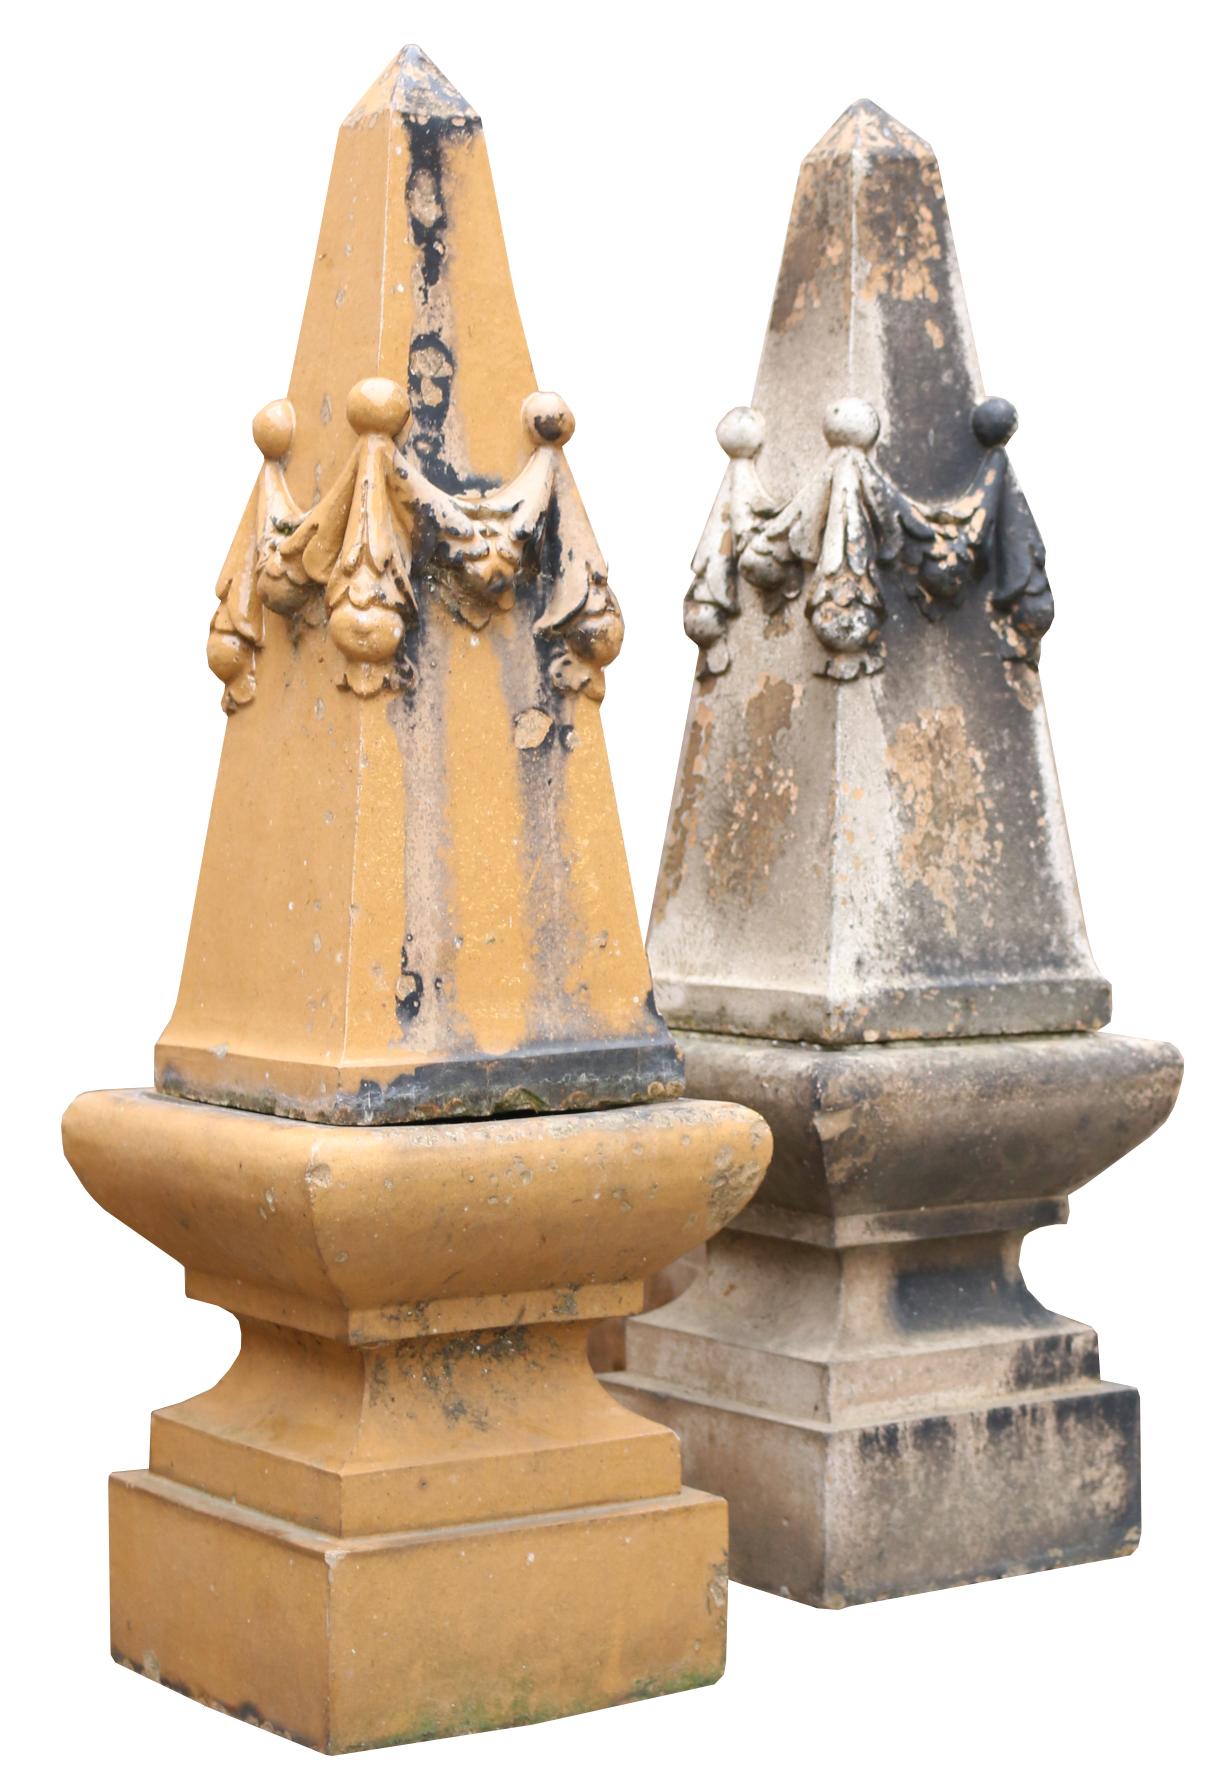 About

A pair of large English glazed stoneware Garden obelisks or gate pier finials. 

Condition report

Both of these obelisks come in two components. There is a difference in the glazing. There are no breaks or cracks, however there are